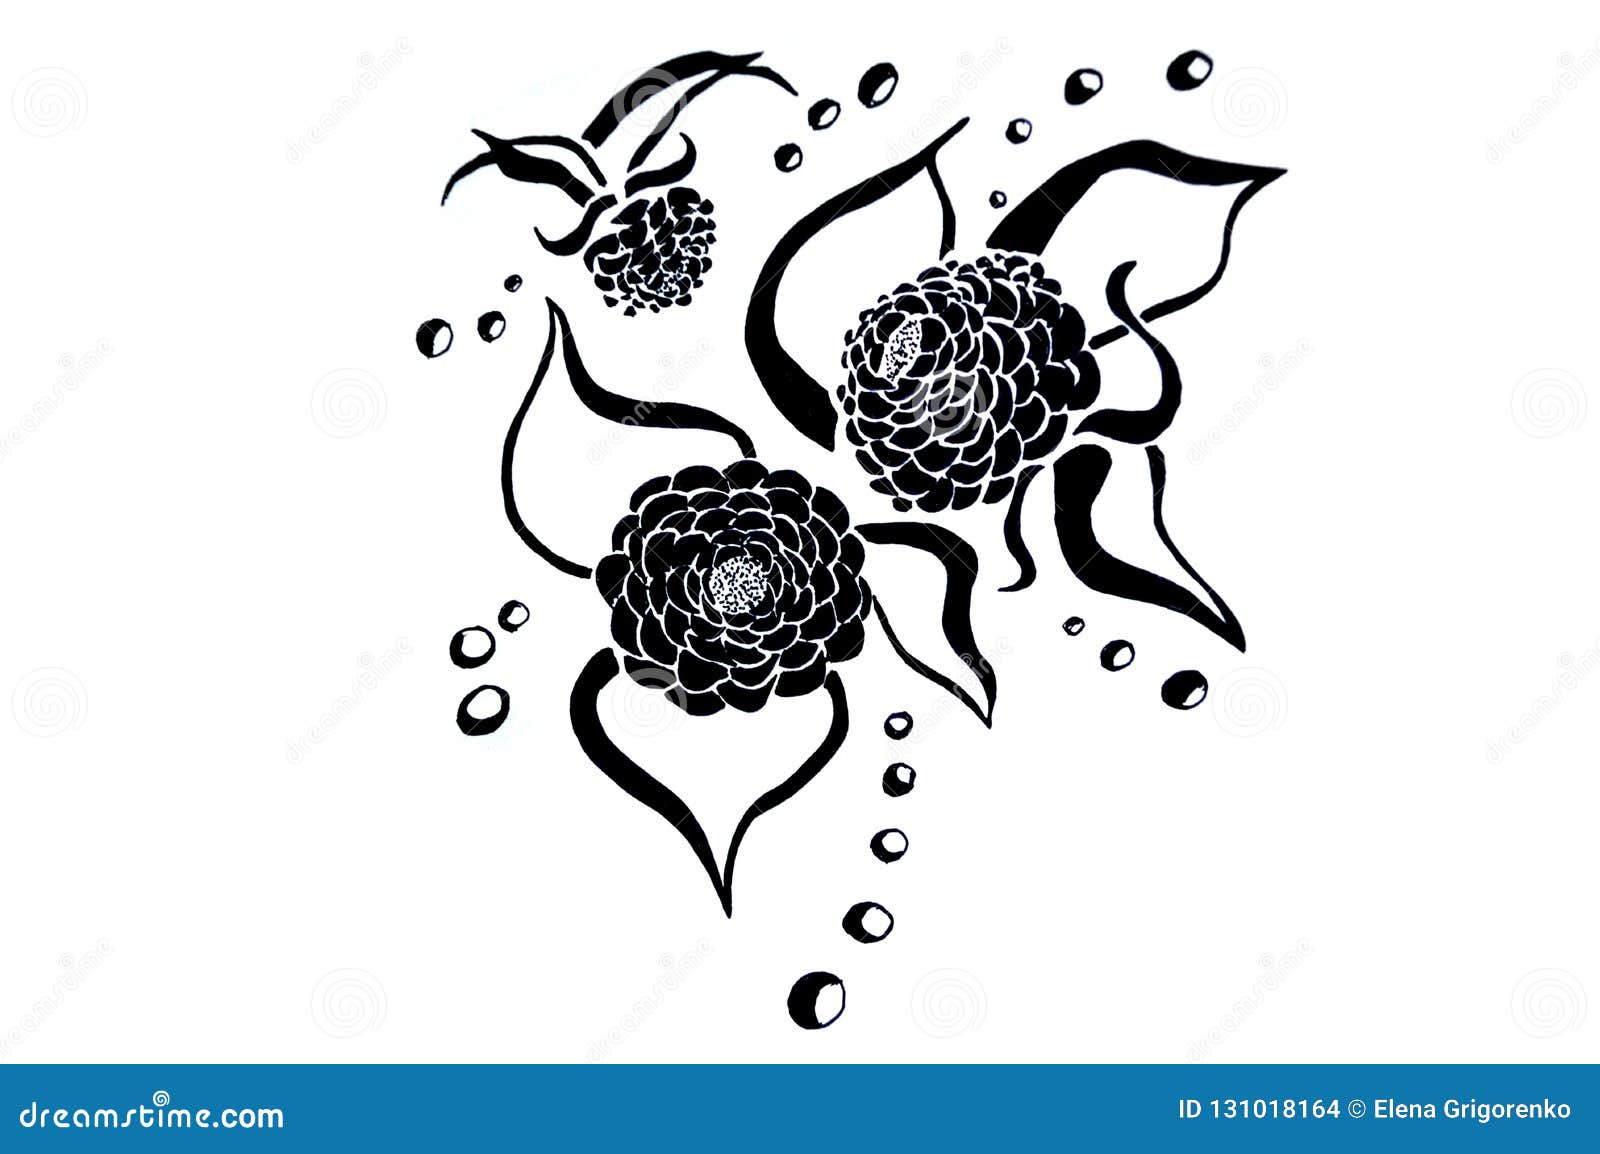 this is my design | Night blooming flowers, The way of kings, Symbol tattoos